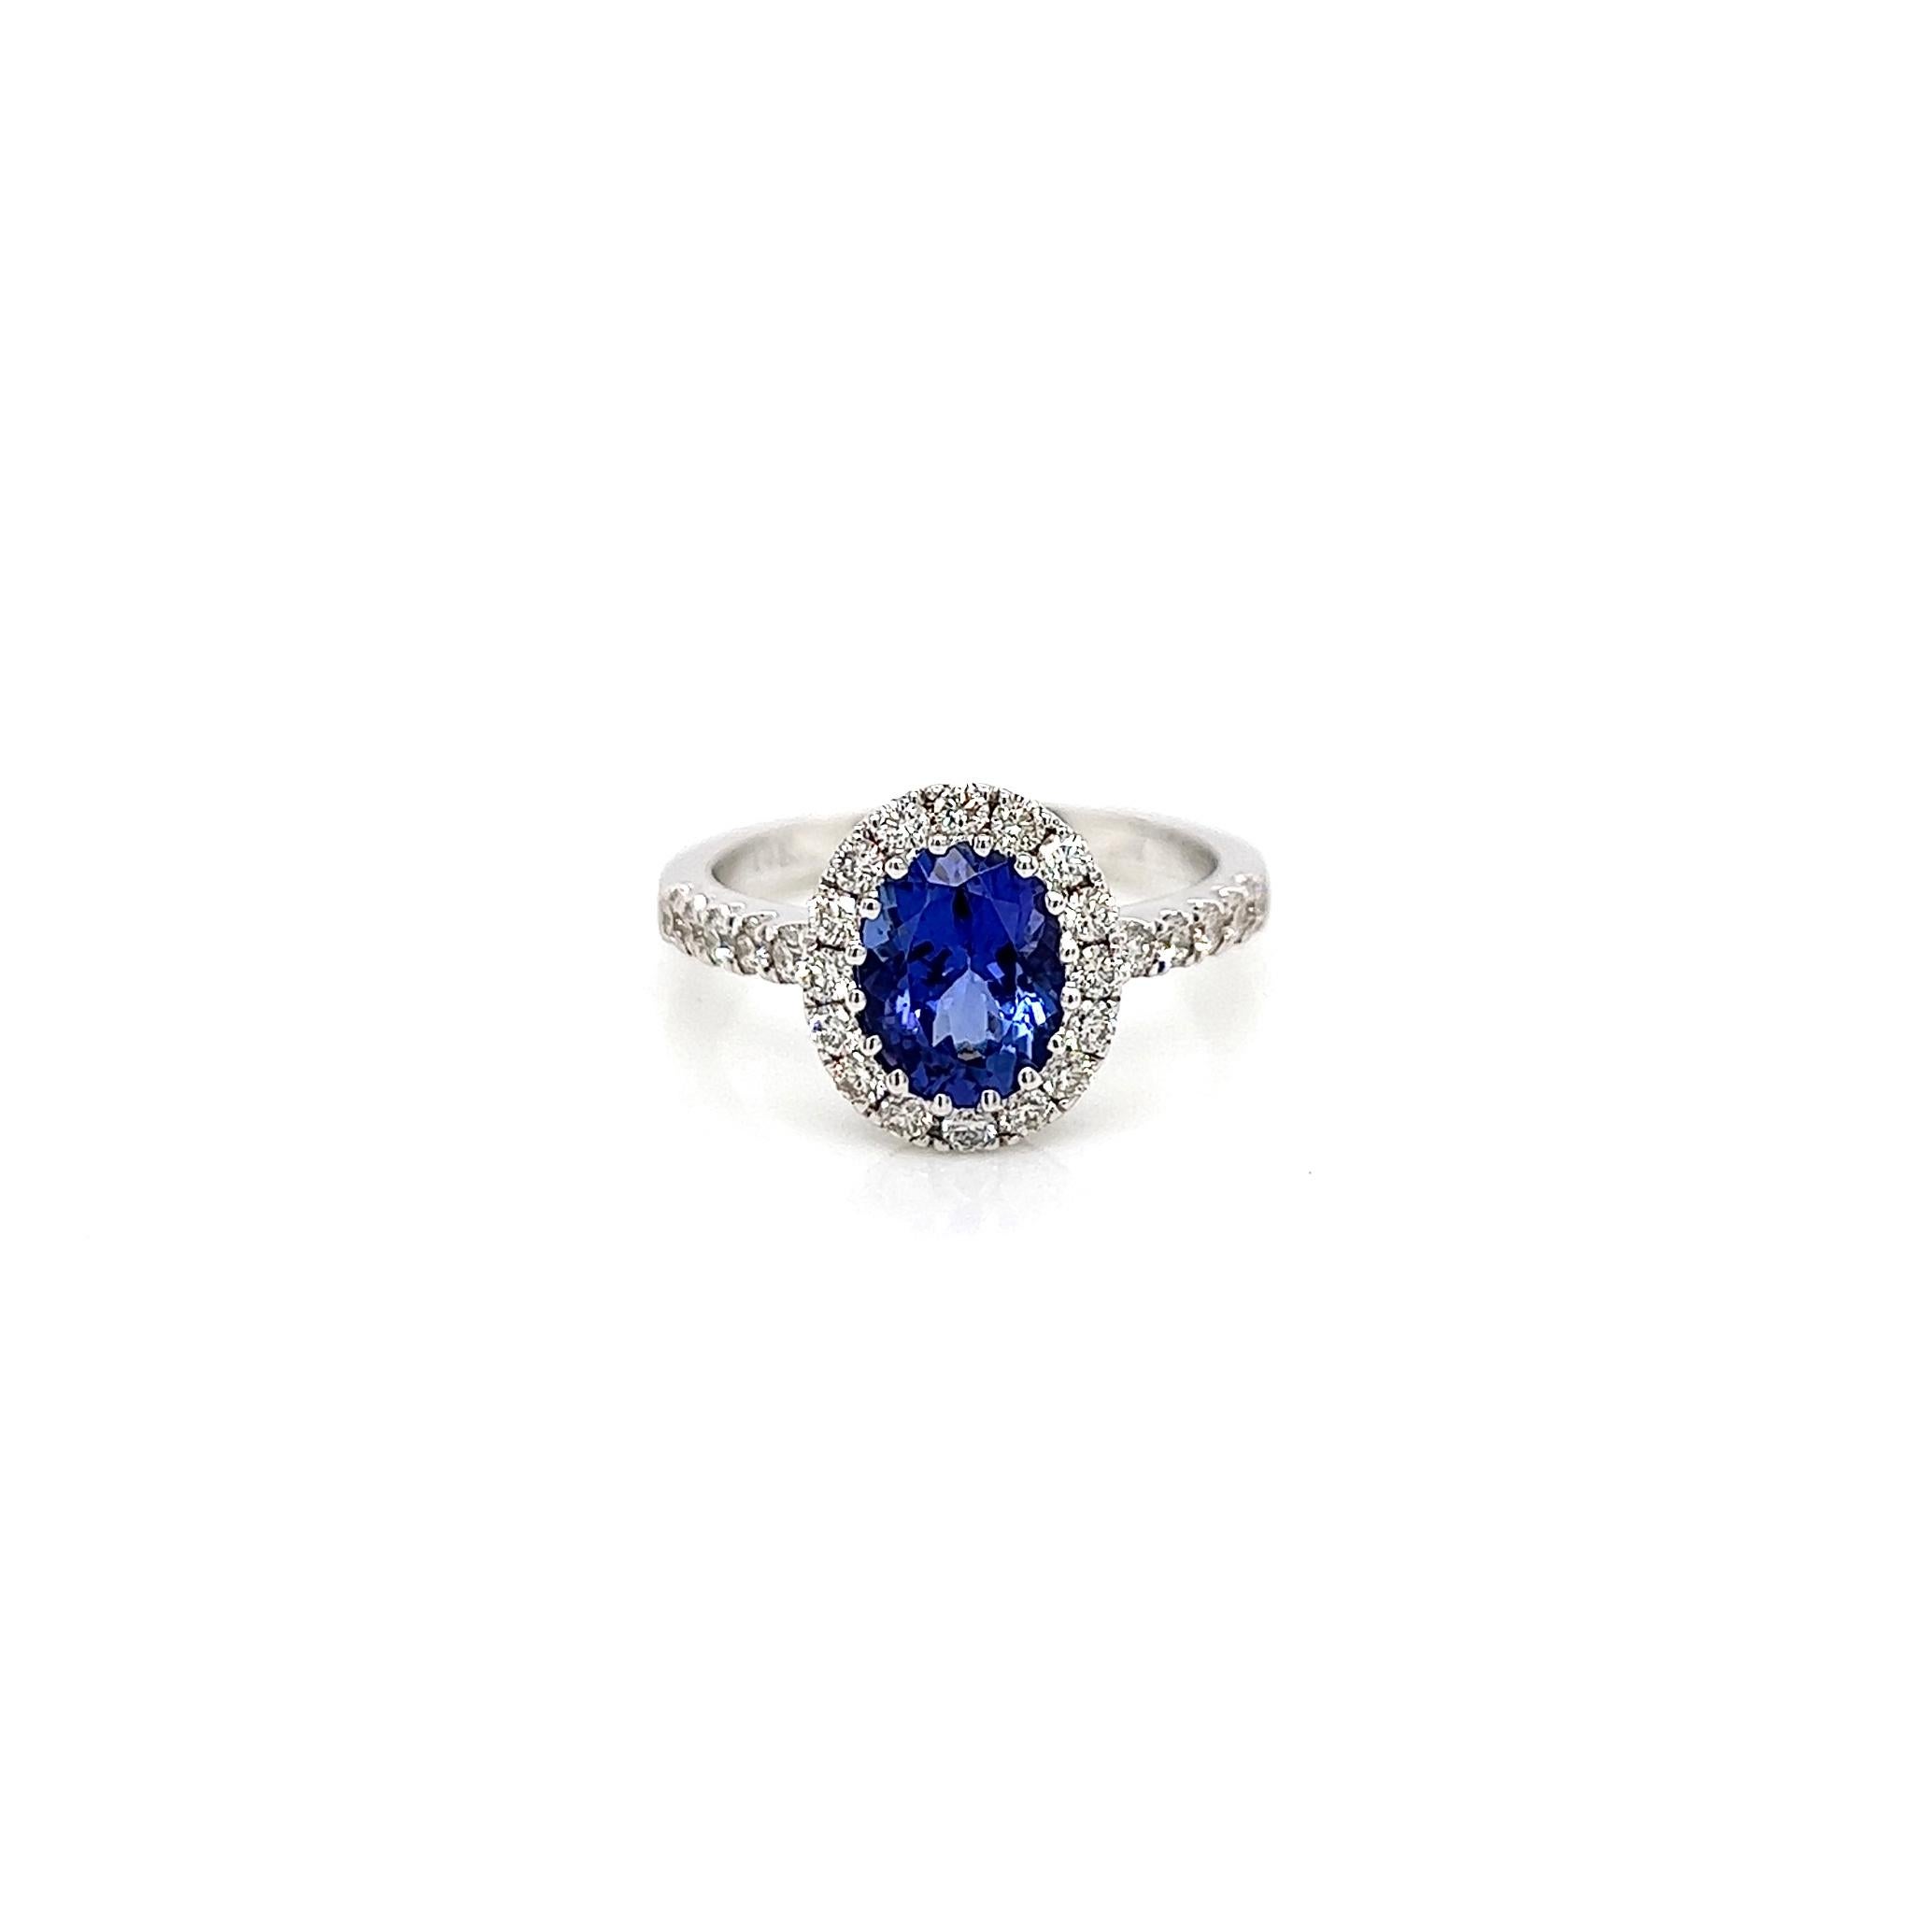 2.21 Total Carat Tanzanite Diamond Ladies Ring

Looking for a fabulous tanzanite diamond ring? Then you have definitely come to the right place. Tanzanite diamond ring with classic halo design will look fabulous on any woman.
Gleaming stones are set